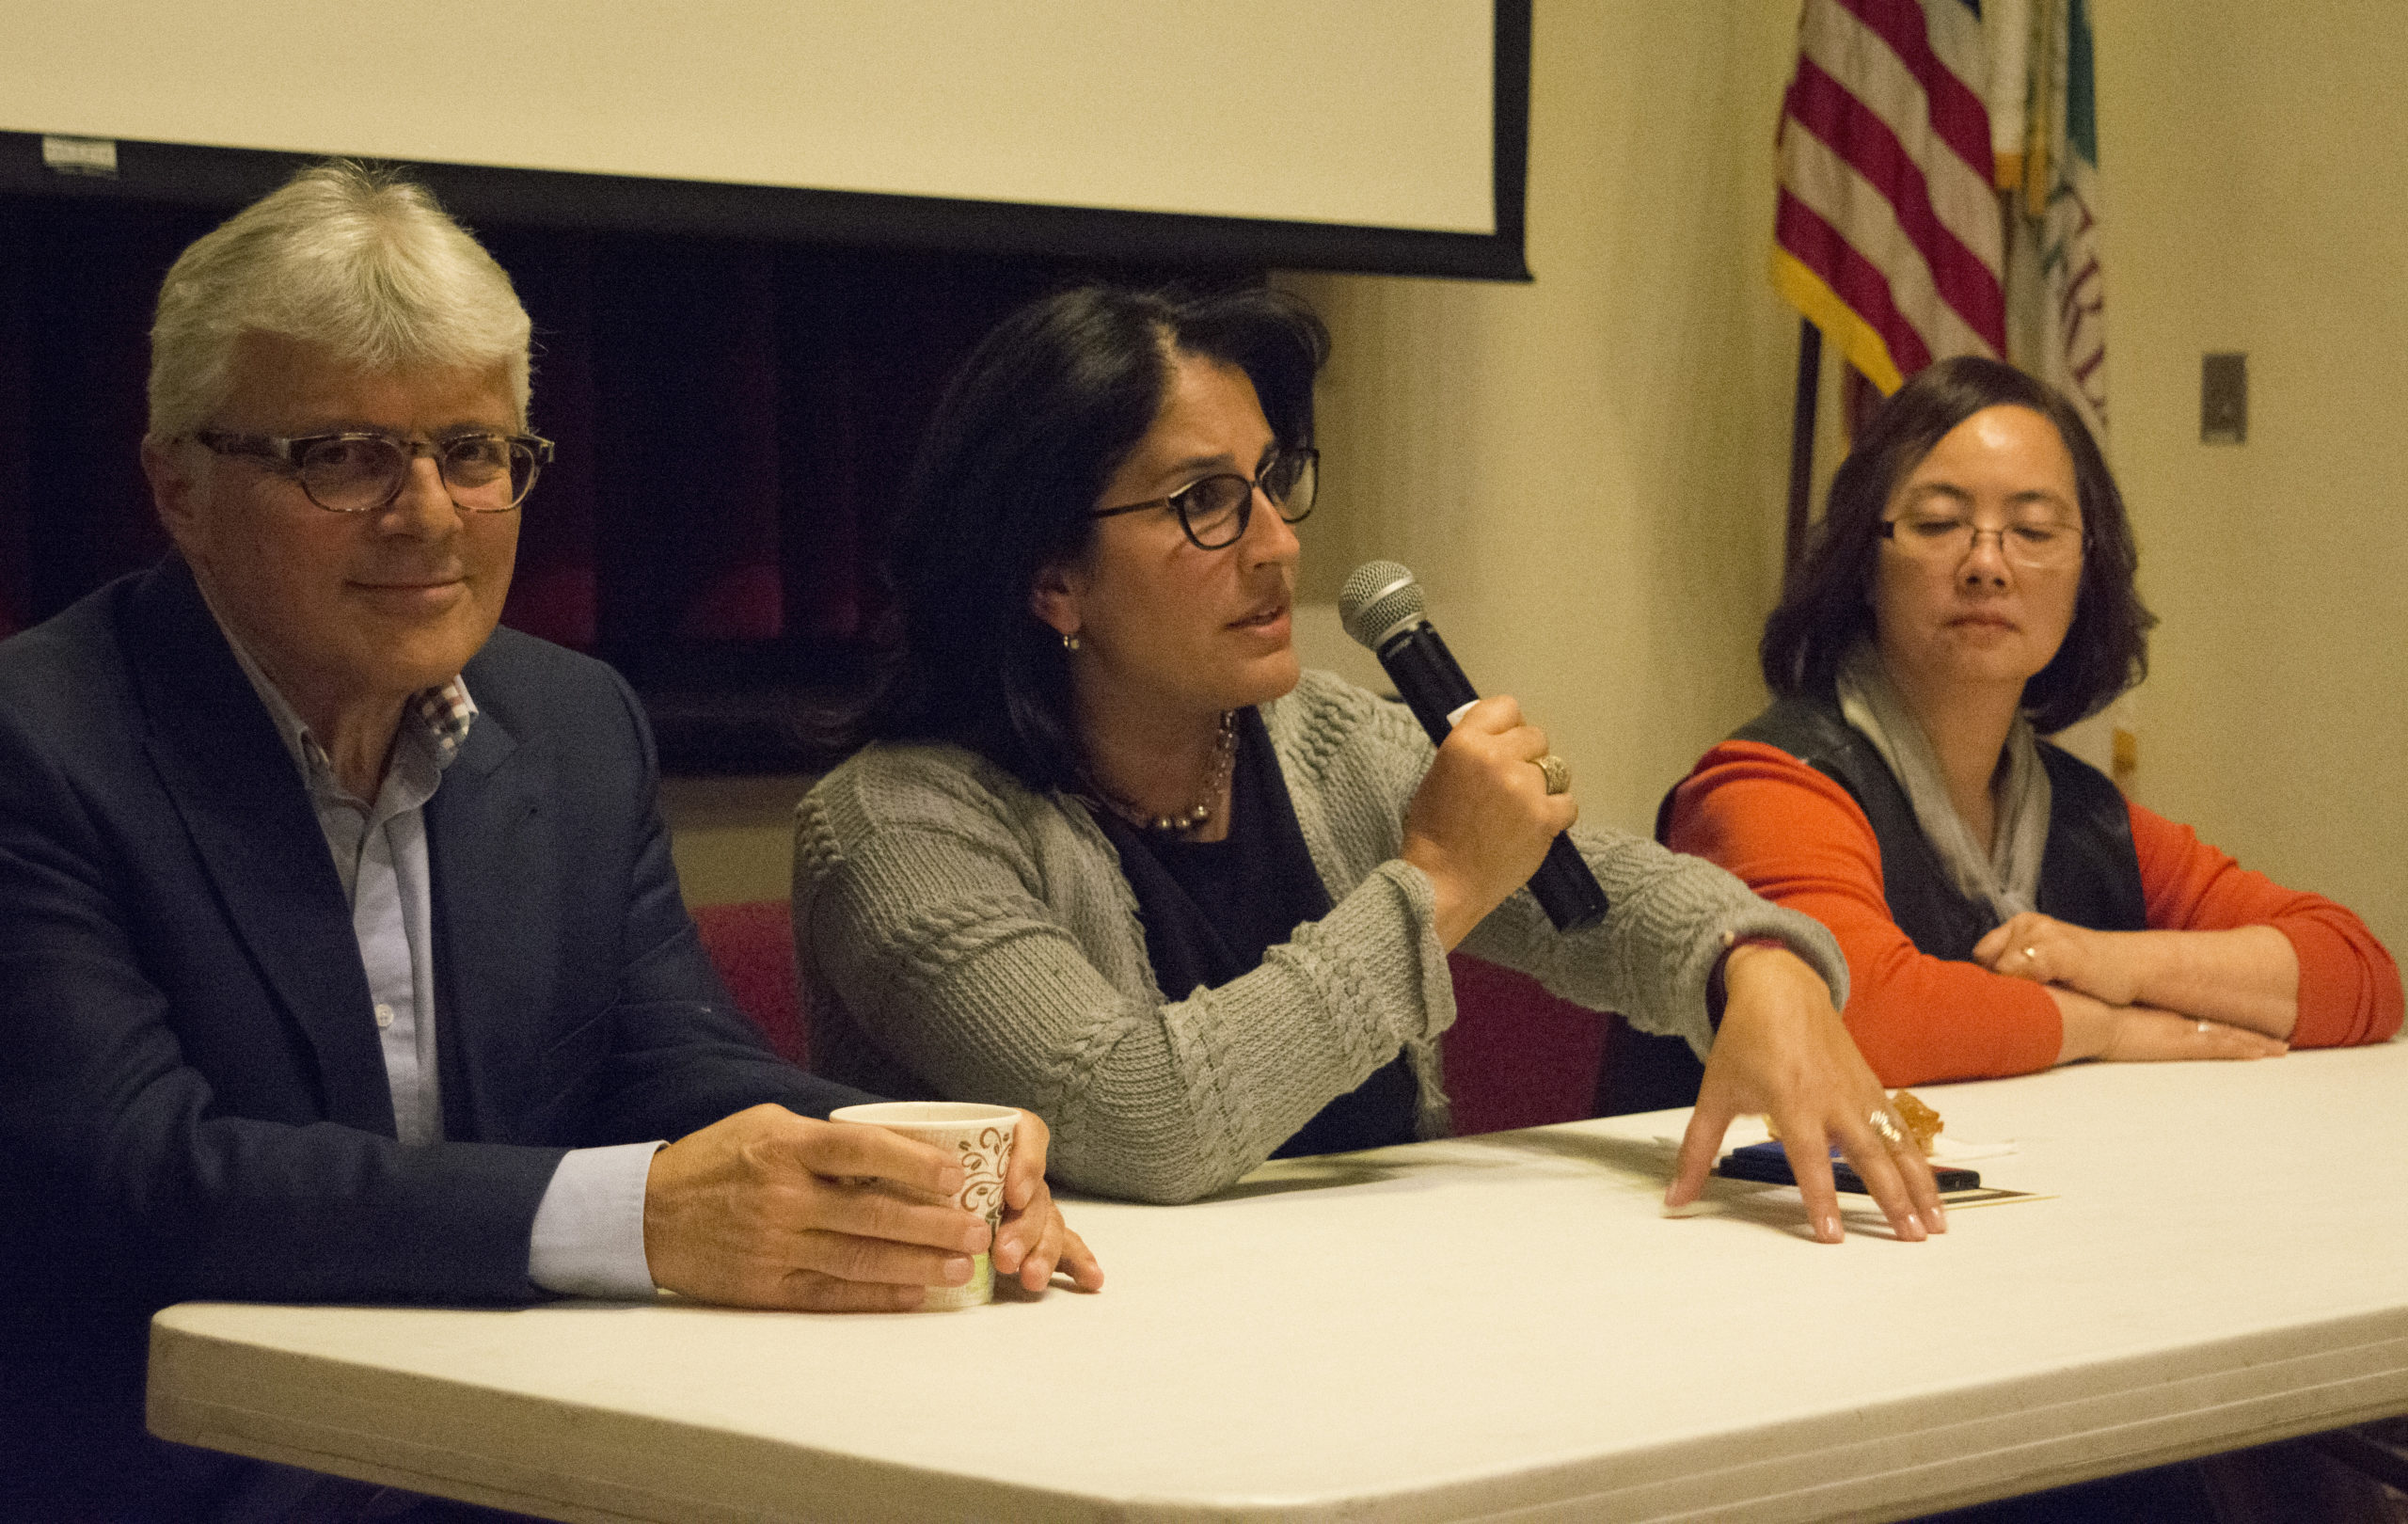 Mansour Karimzadeh, Rebecca Sassouni and Else Yung, take questions from audience members following their respective presentations. (Photo by Janelle Clausen)